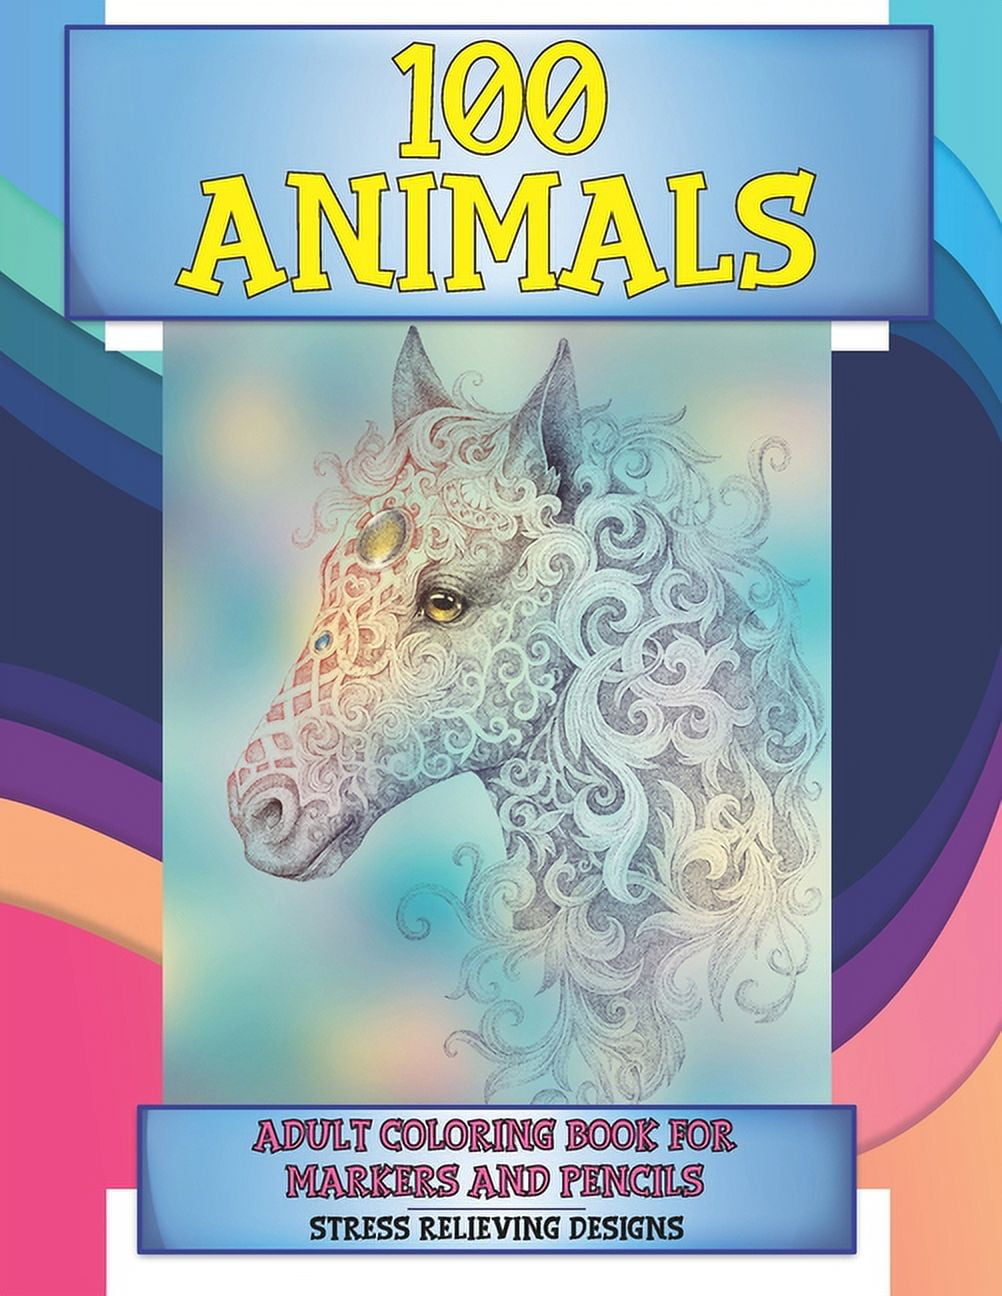 Adult Coloring Book for Markers and Pencils - 100 Animals - Stress  Relieving Designs (Paperback) 